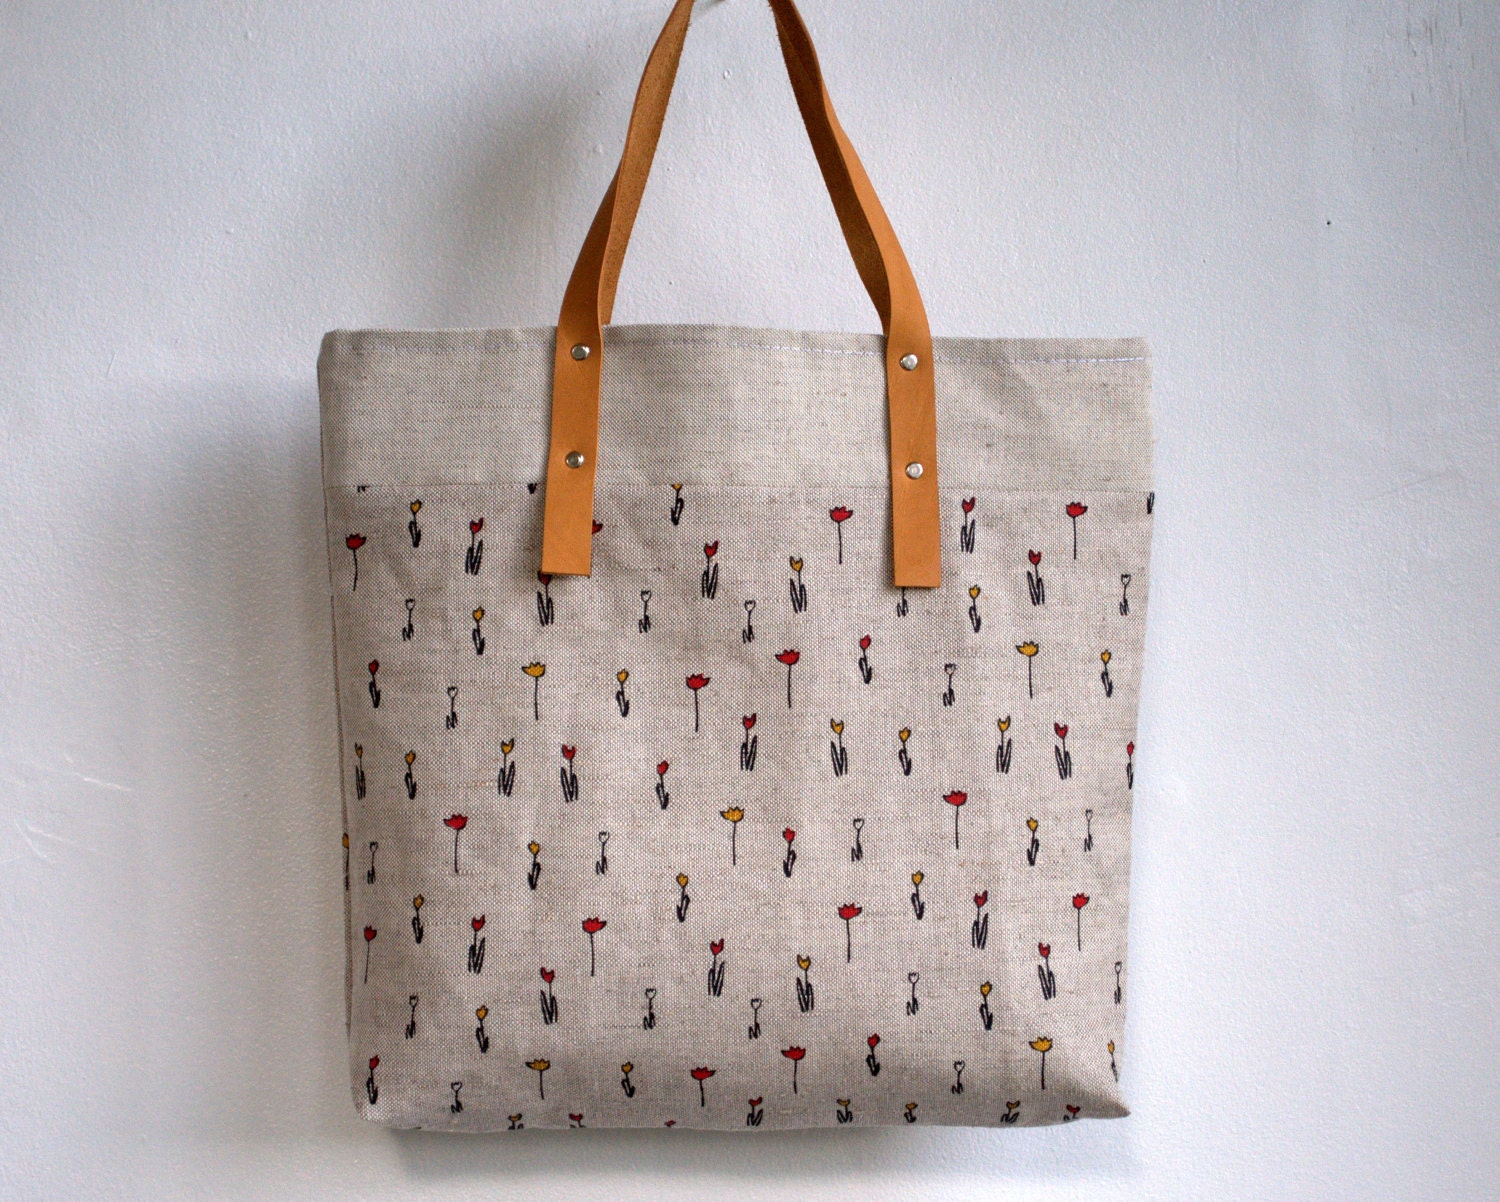 Tote bag, shopping bag,market bag linen  with leather handles with zipper